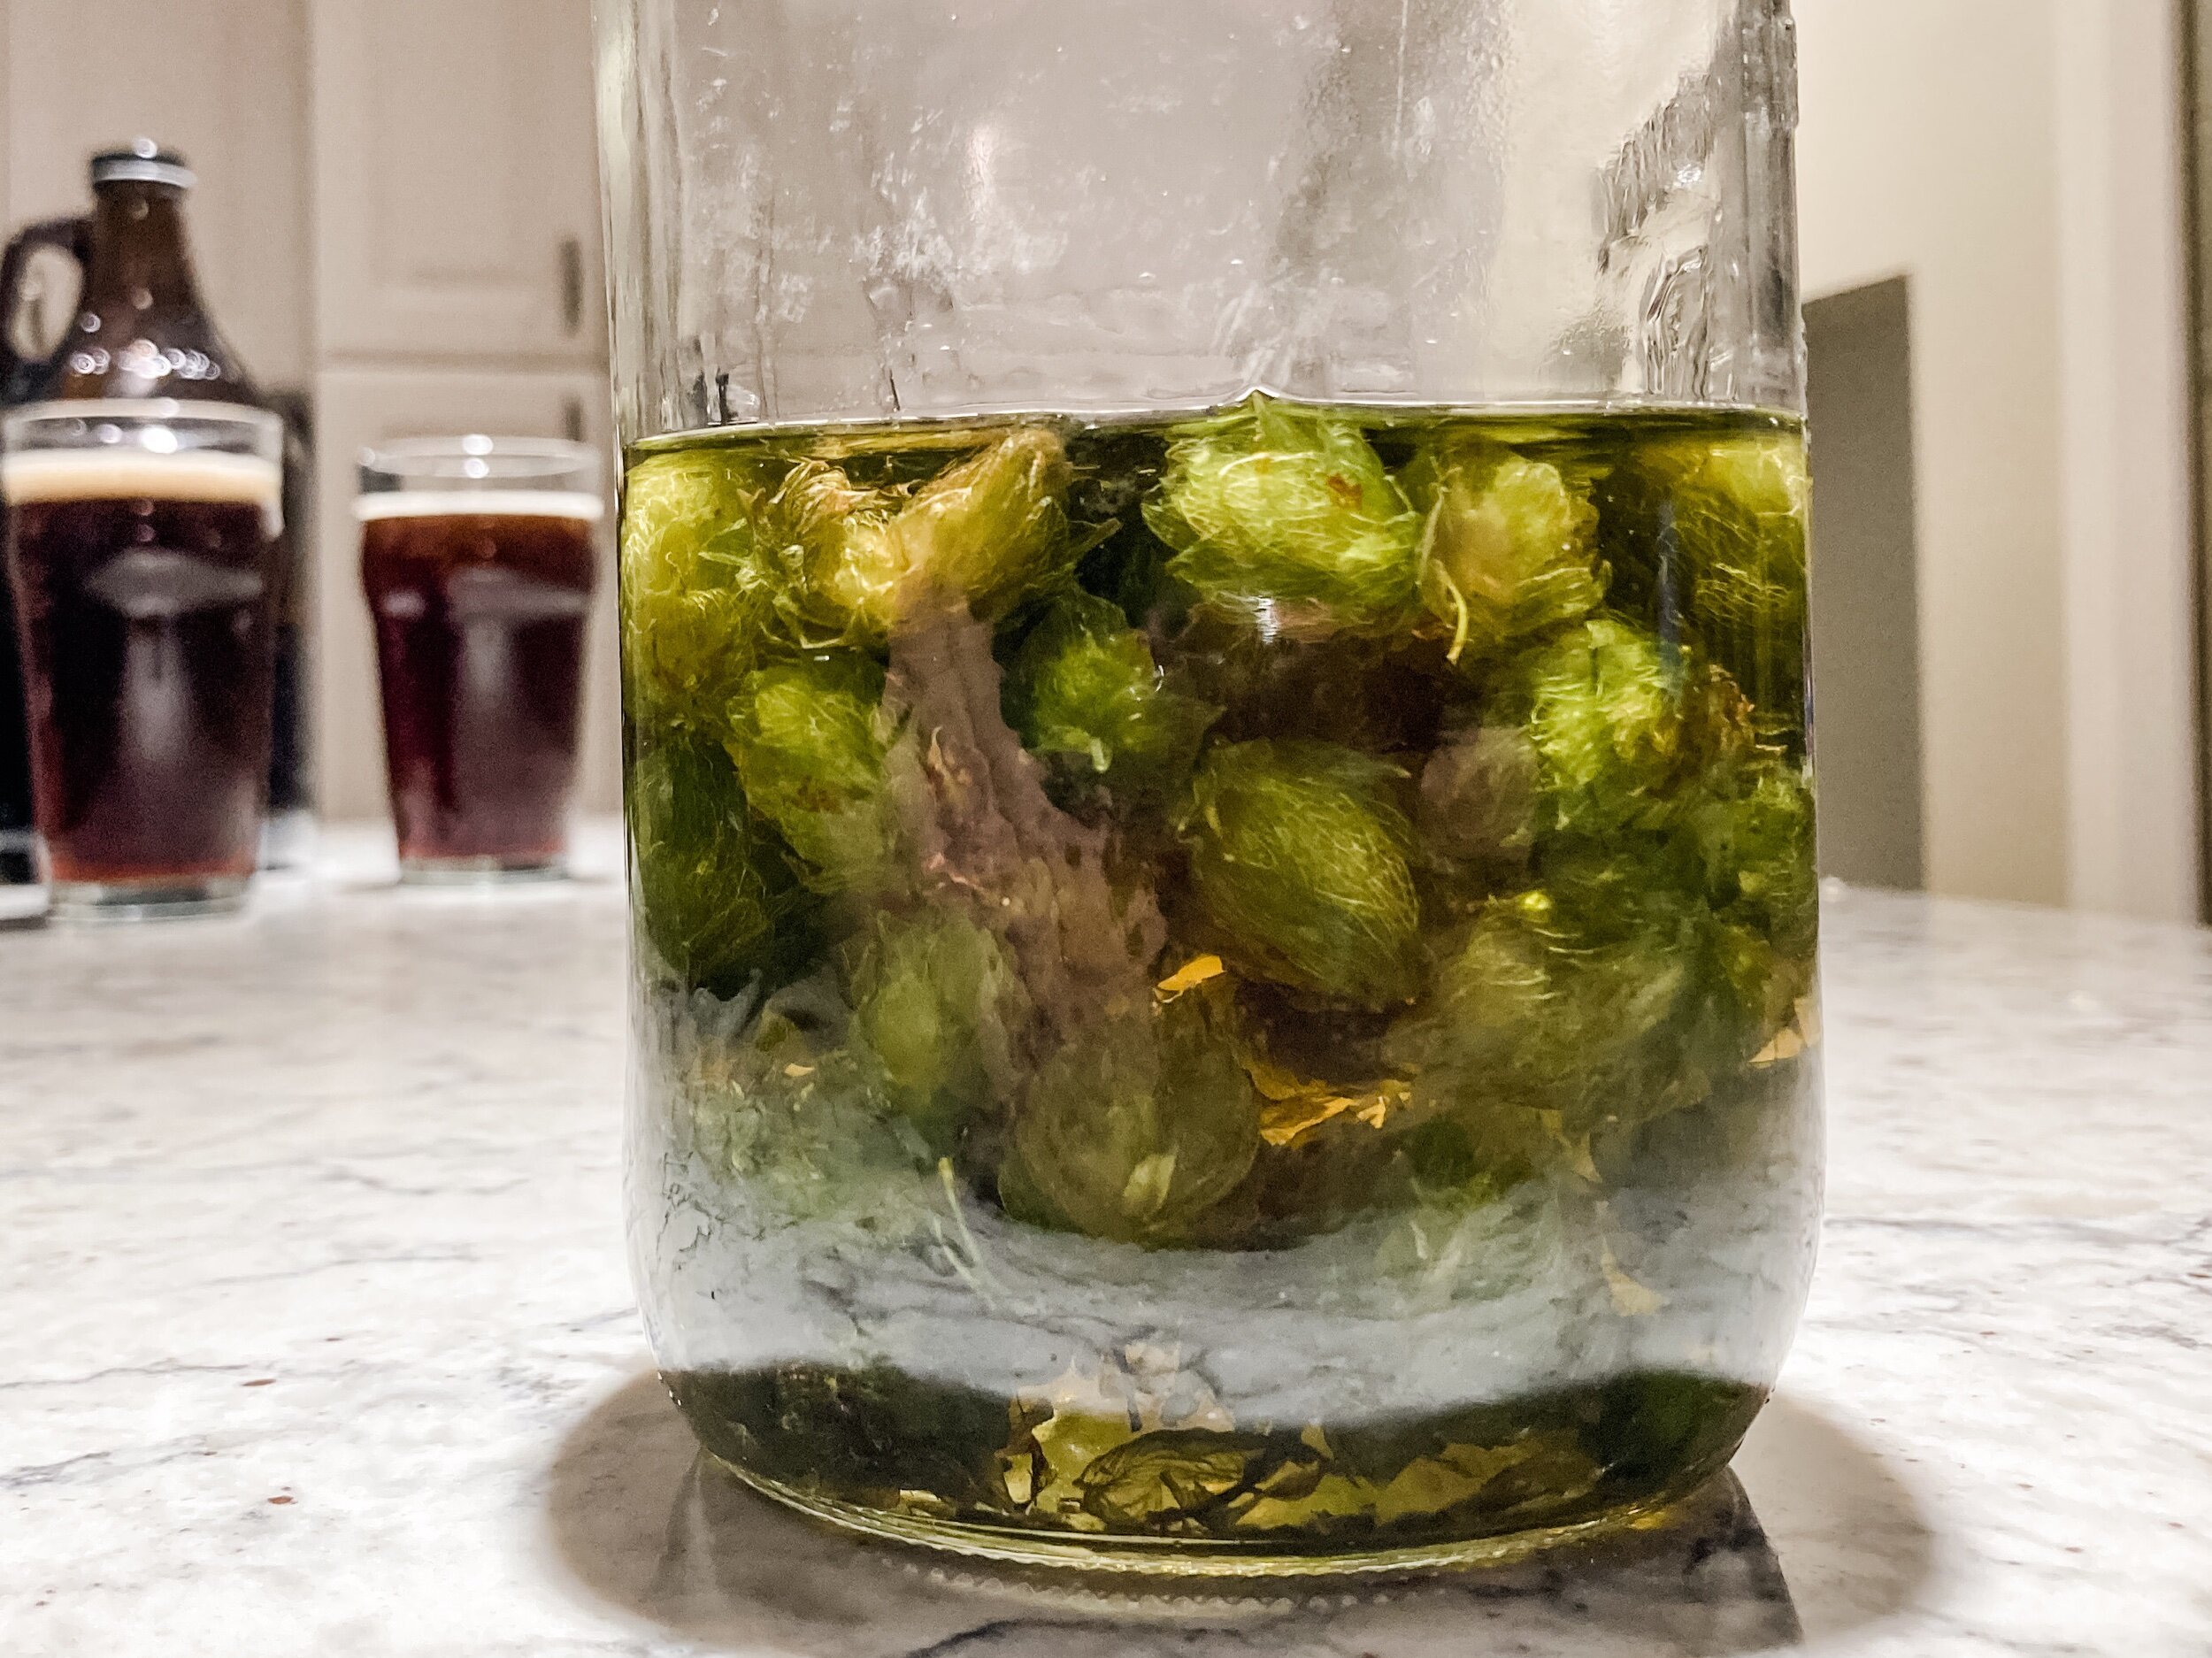 Infusing olive oil with hops